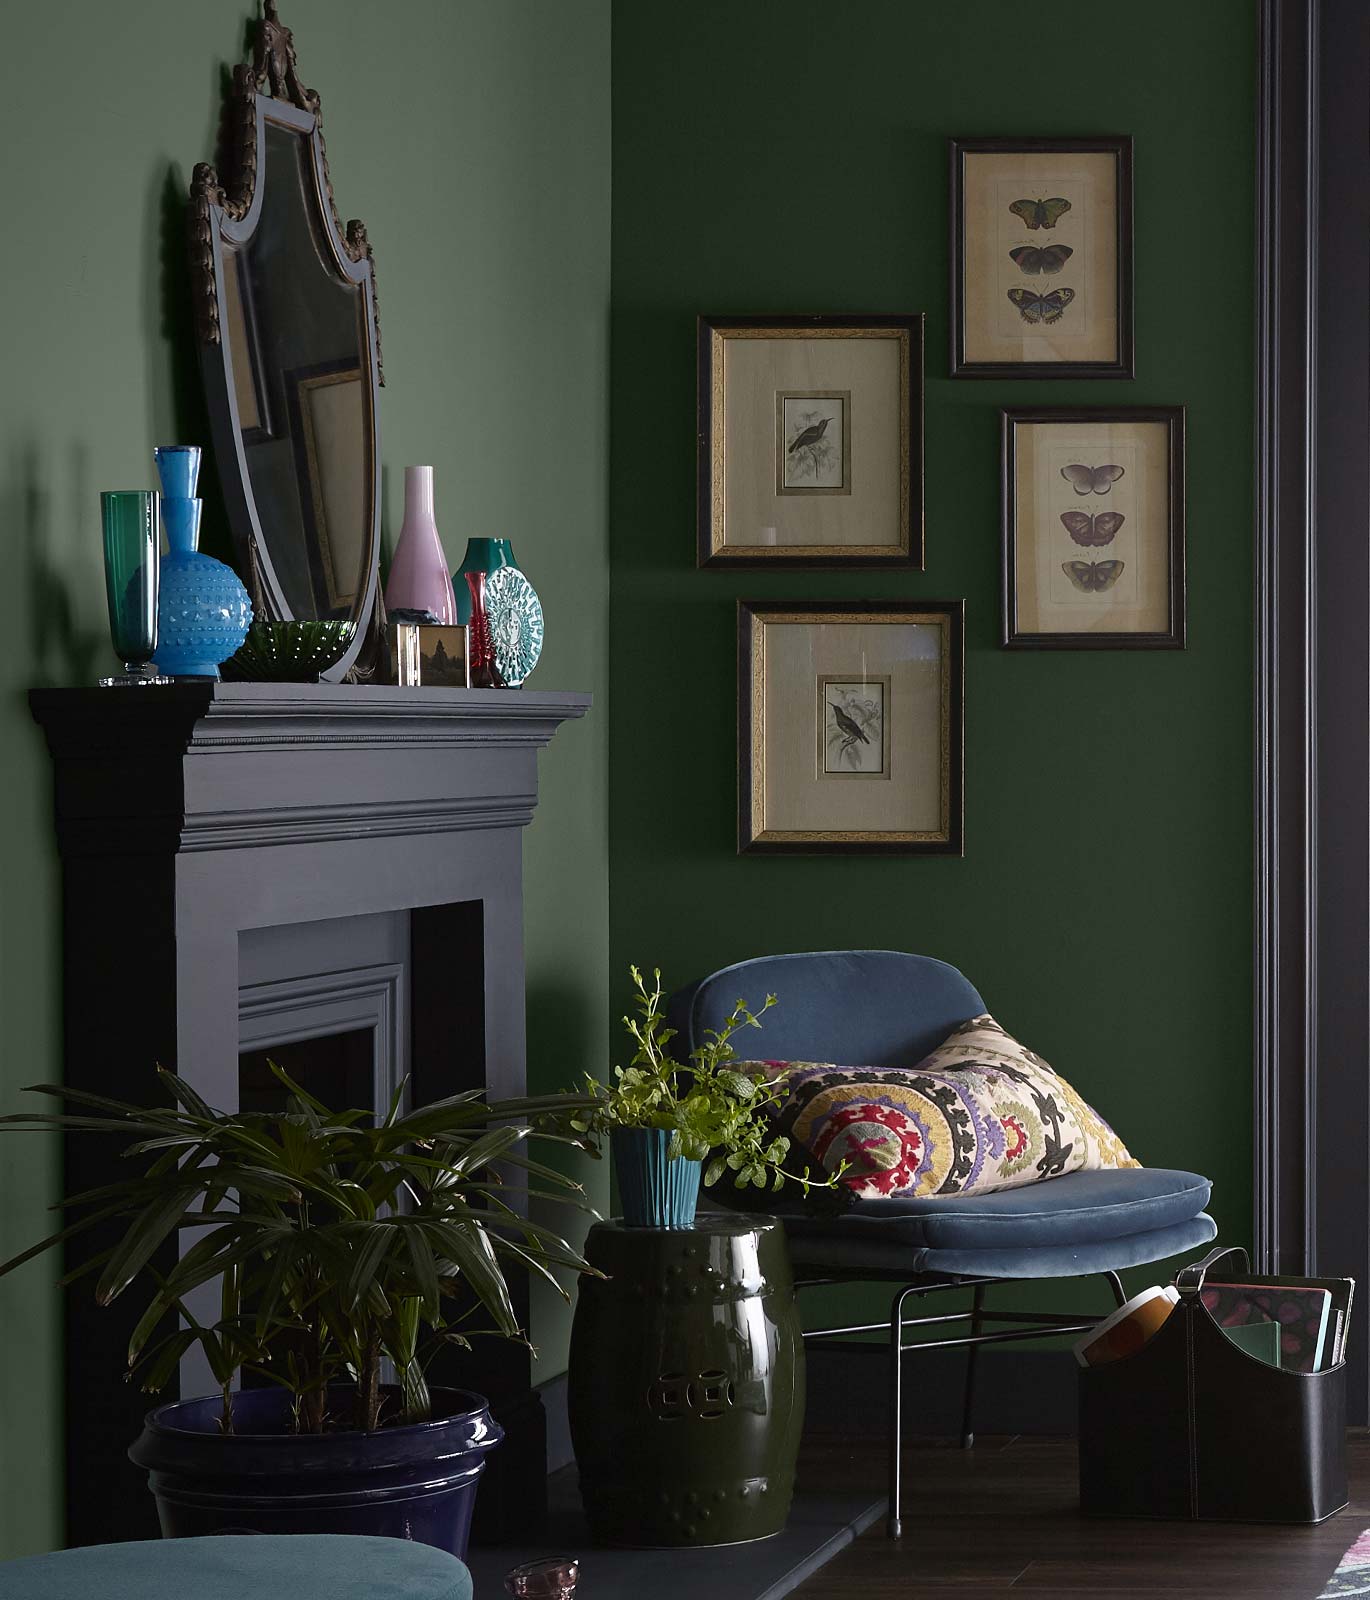 A quiet corner of a living room showing a black painted fireplace, a velvety chair in a blue color. The walls of the room are painted in a dark green color.